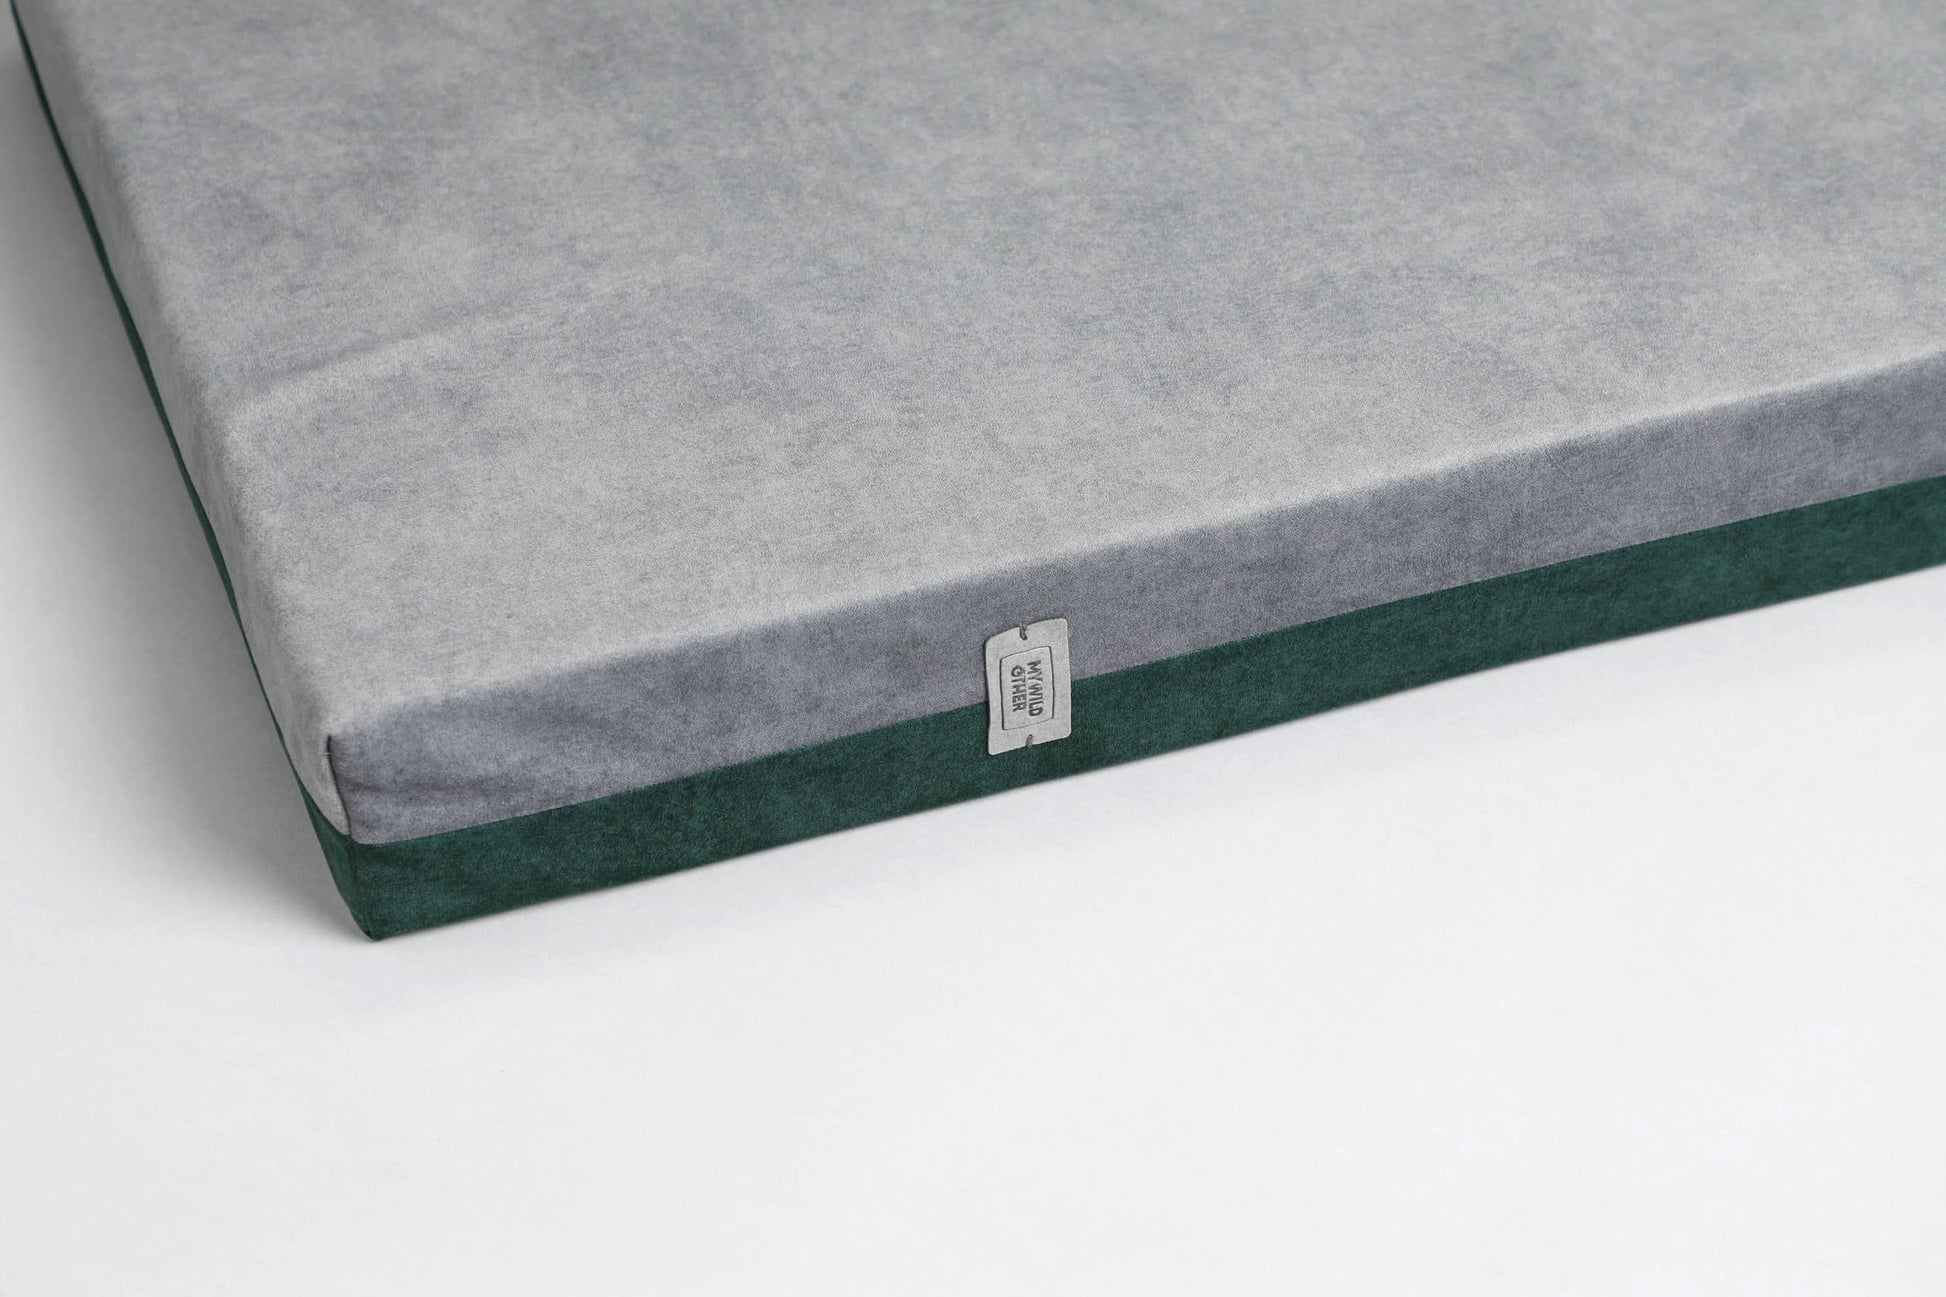 Transformer dog bed | Extra comfort & support | 2-sided | MOSS GREEN+STEEL GREY - premium dog goods handmade in Europe by animalistus